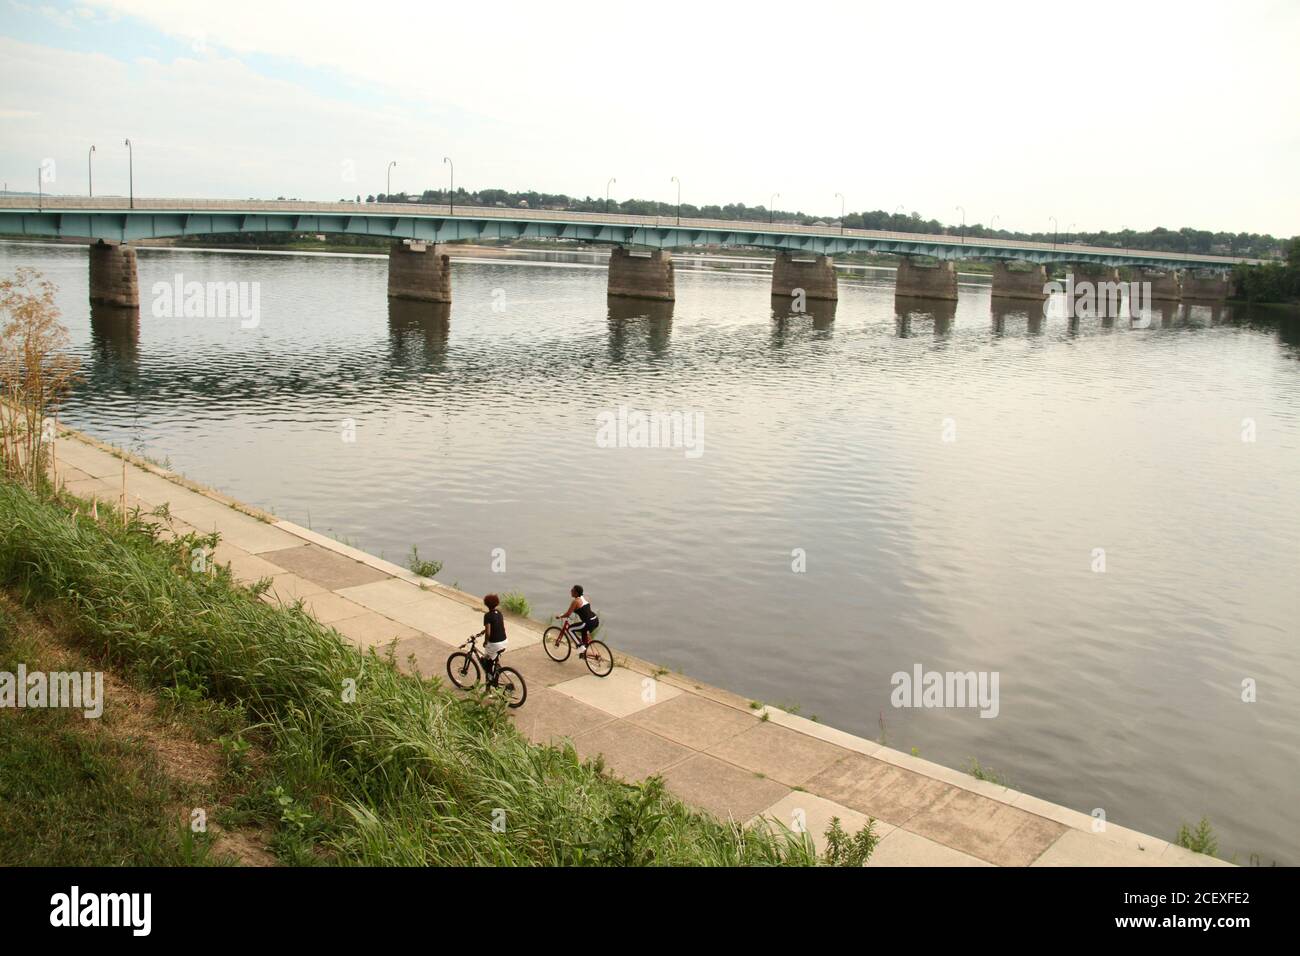 Bridge over the Susquehanna River in Harrisburg, PA, USA. Young people riding bikes on the Riverwalk. Stock Photo